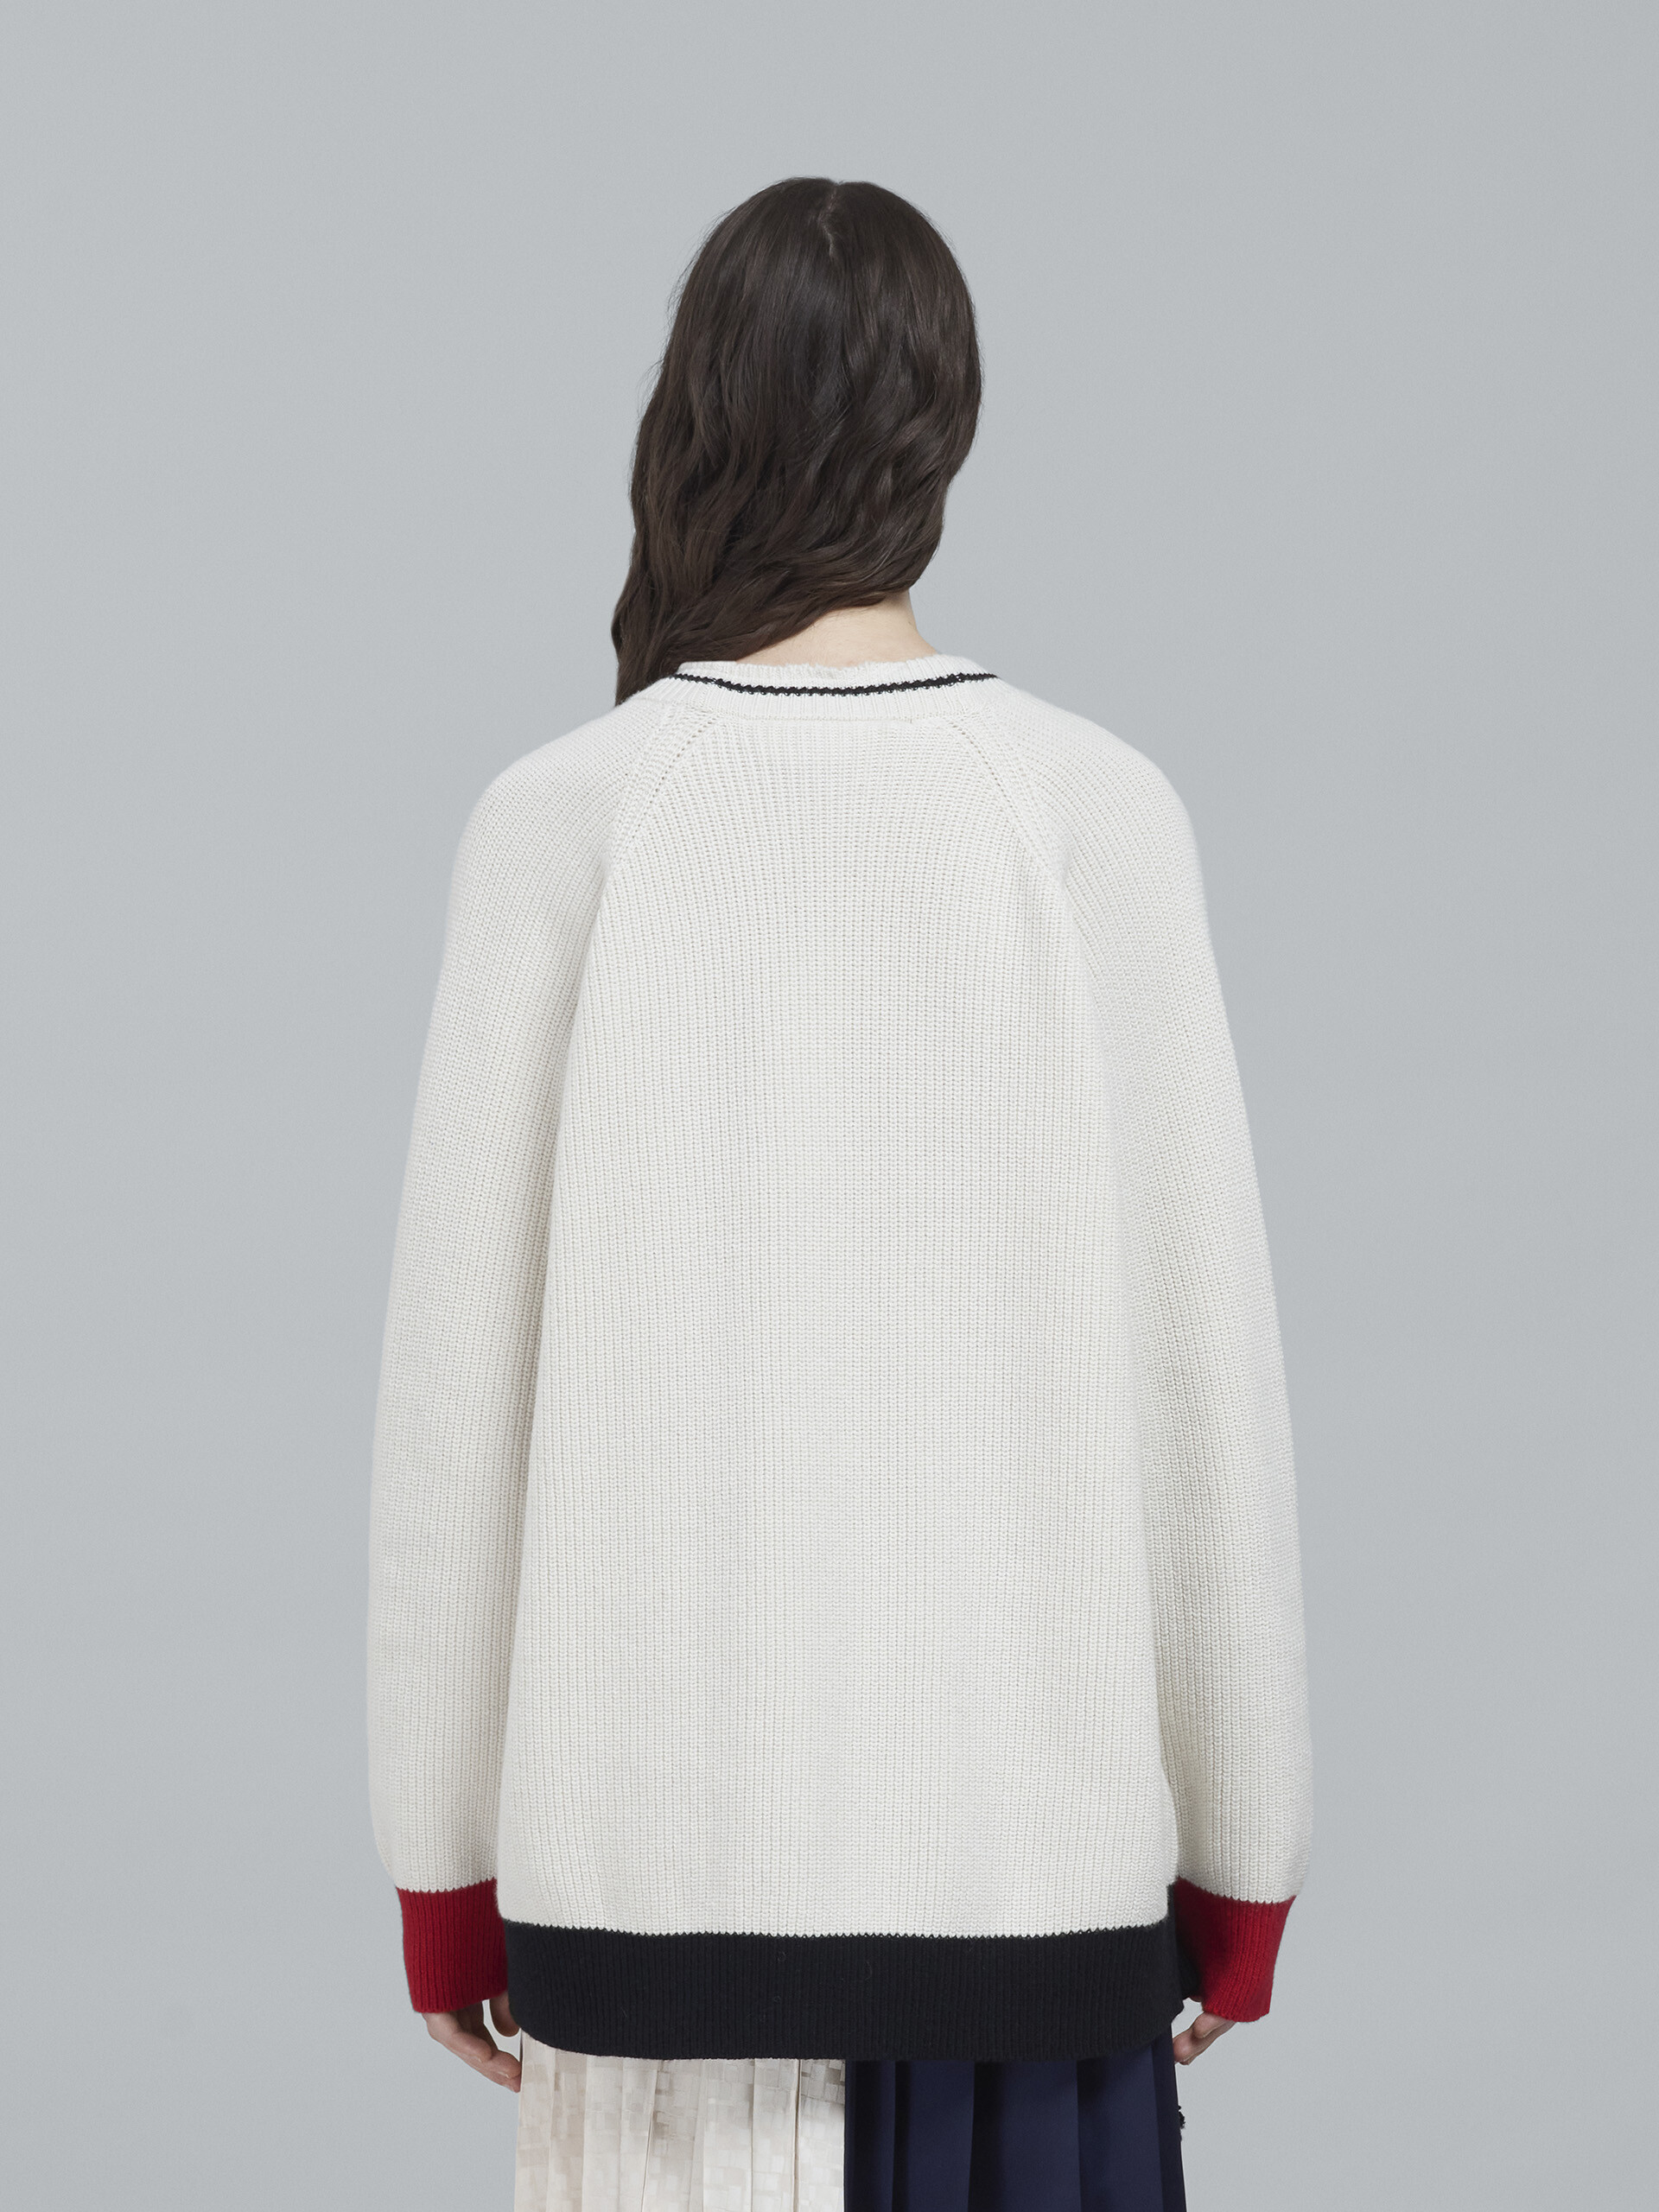 White Shetland wool and cotton long cardigan - Pullovers - Image 3